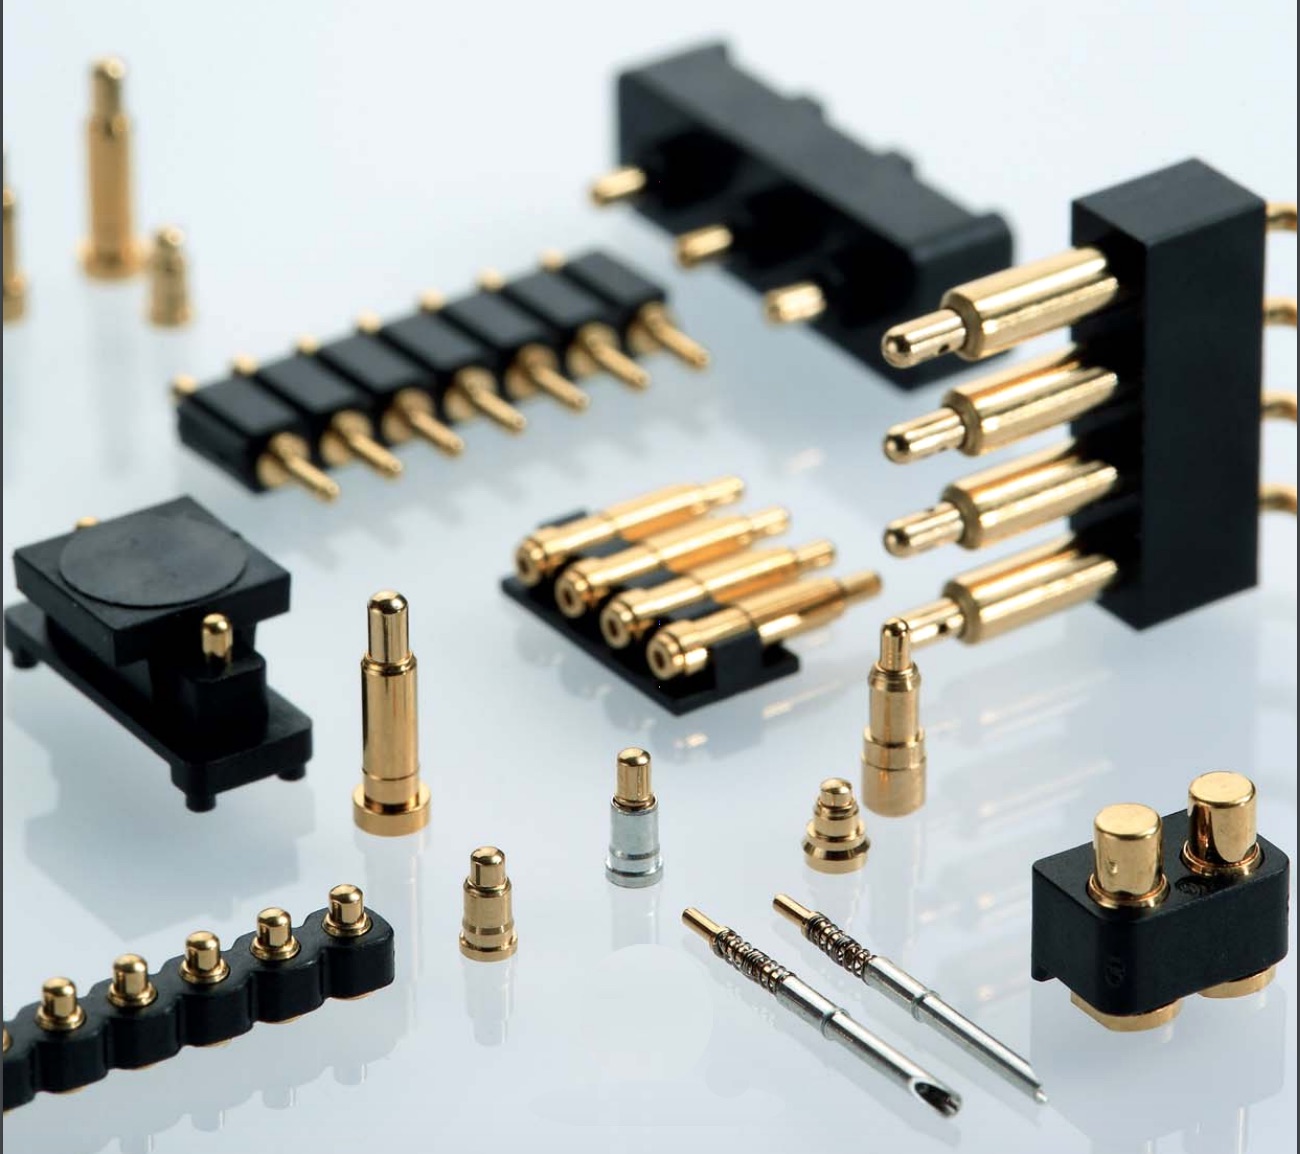 Spring-loaded connector products from precidip